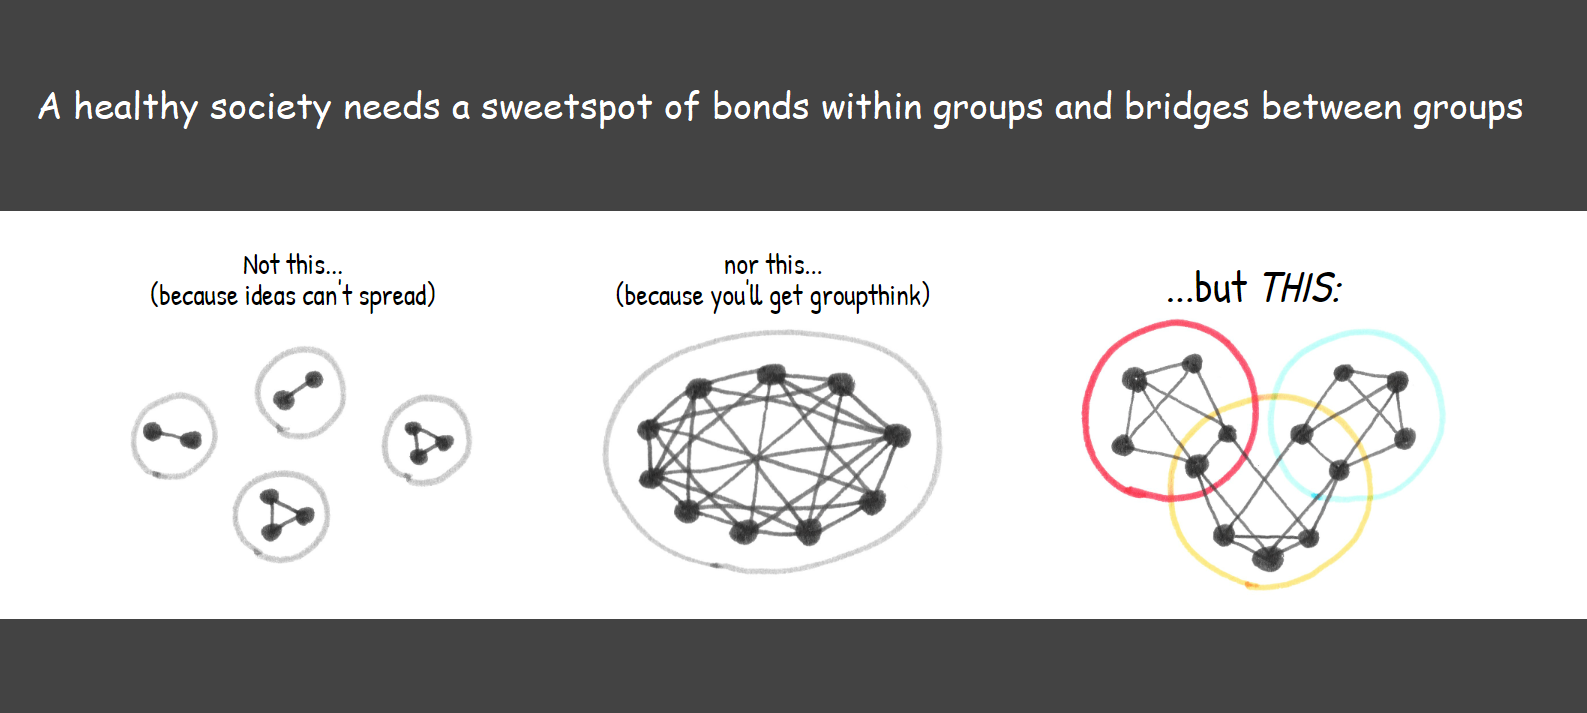 A healthy society needs a sweetspot of bonds within groups and bridges between groups